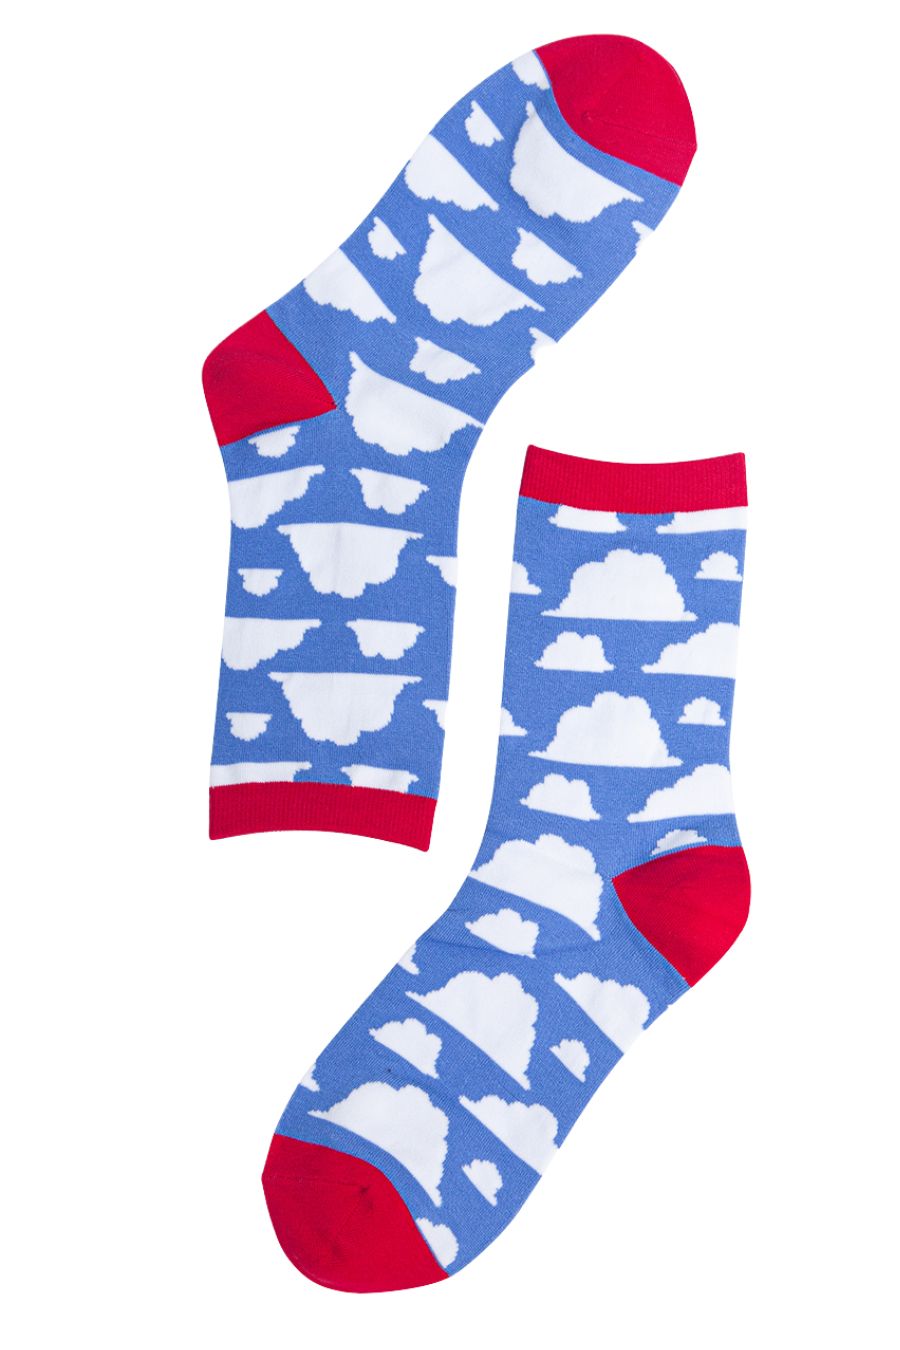 blue, red bamboo socks with white clouds